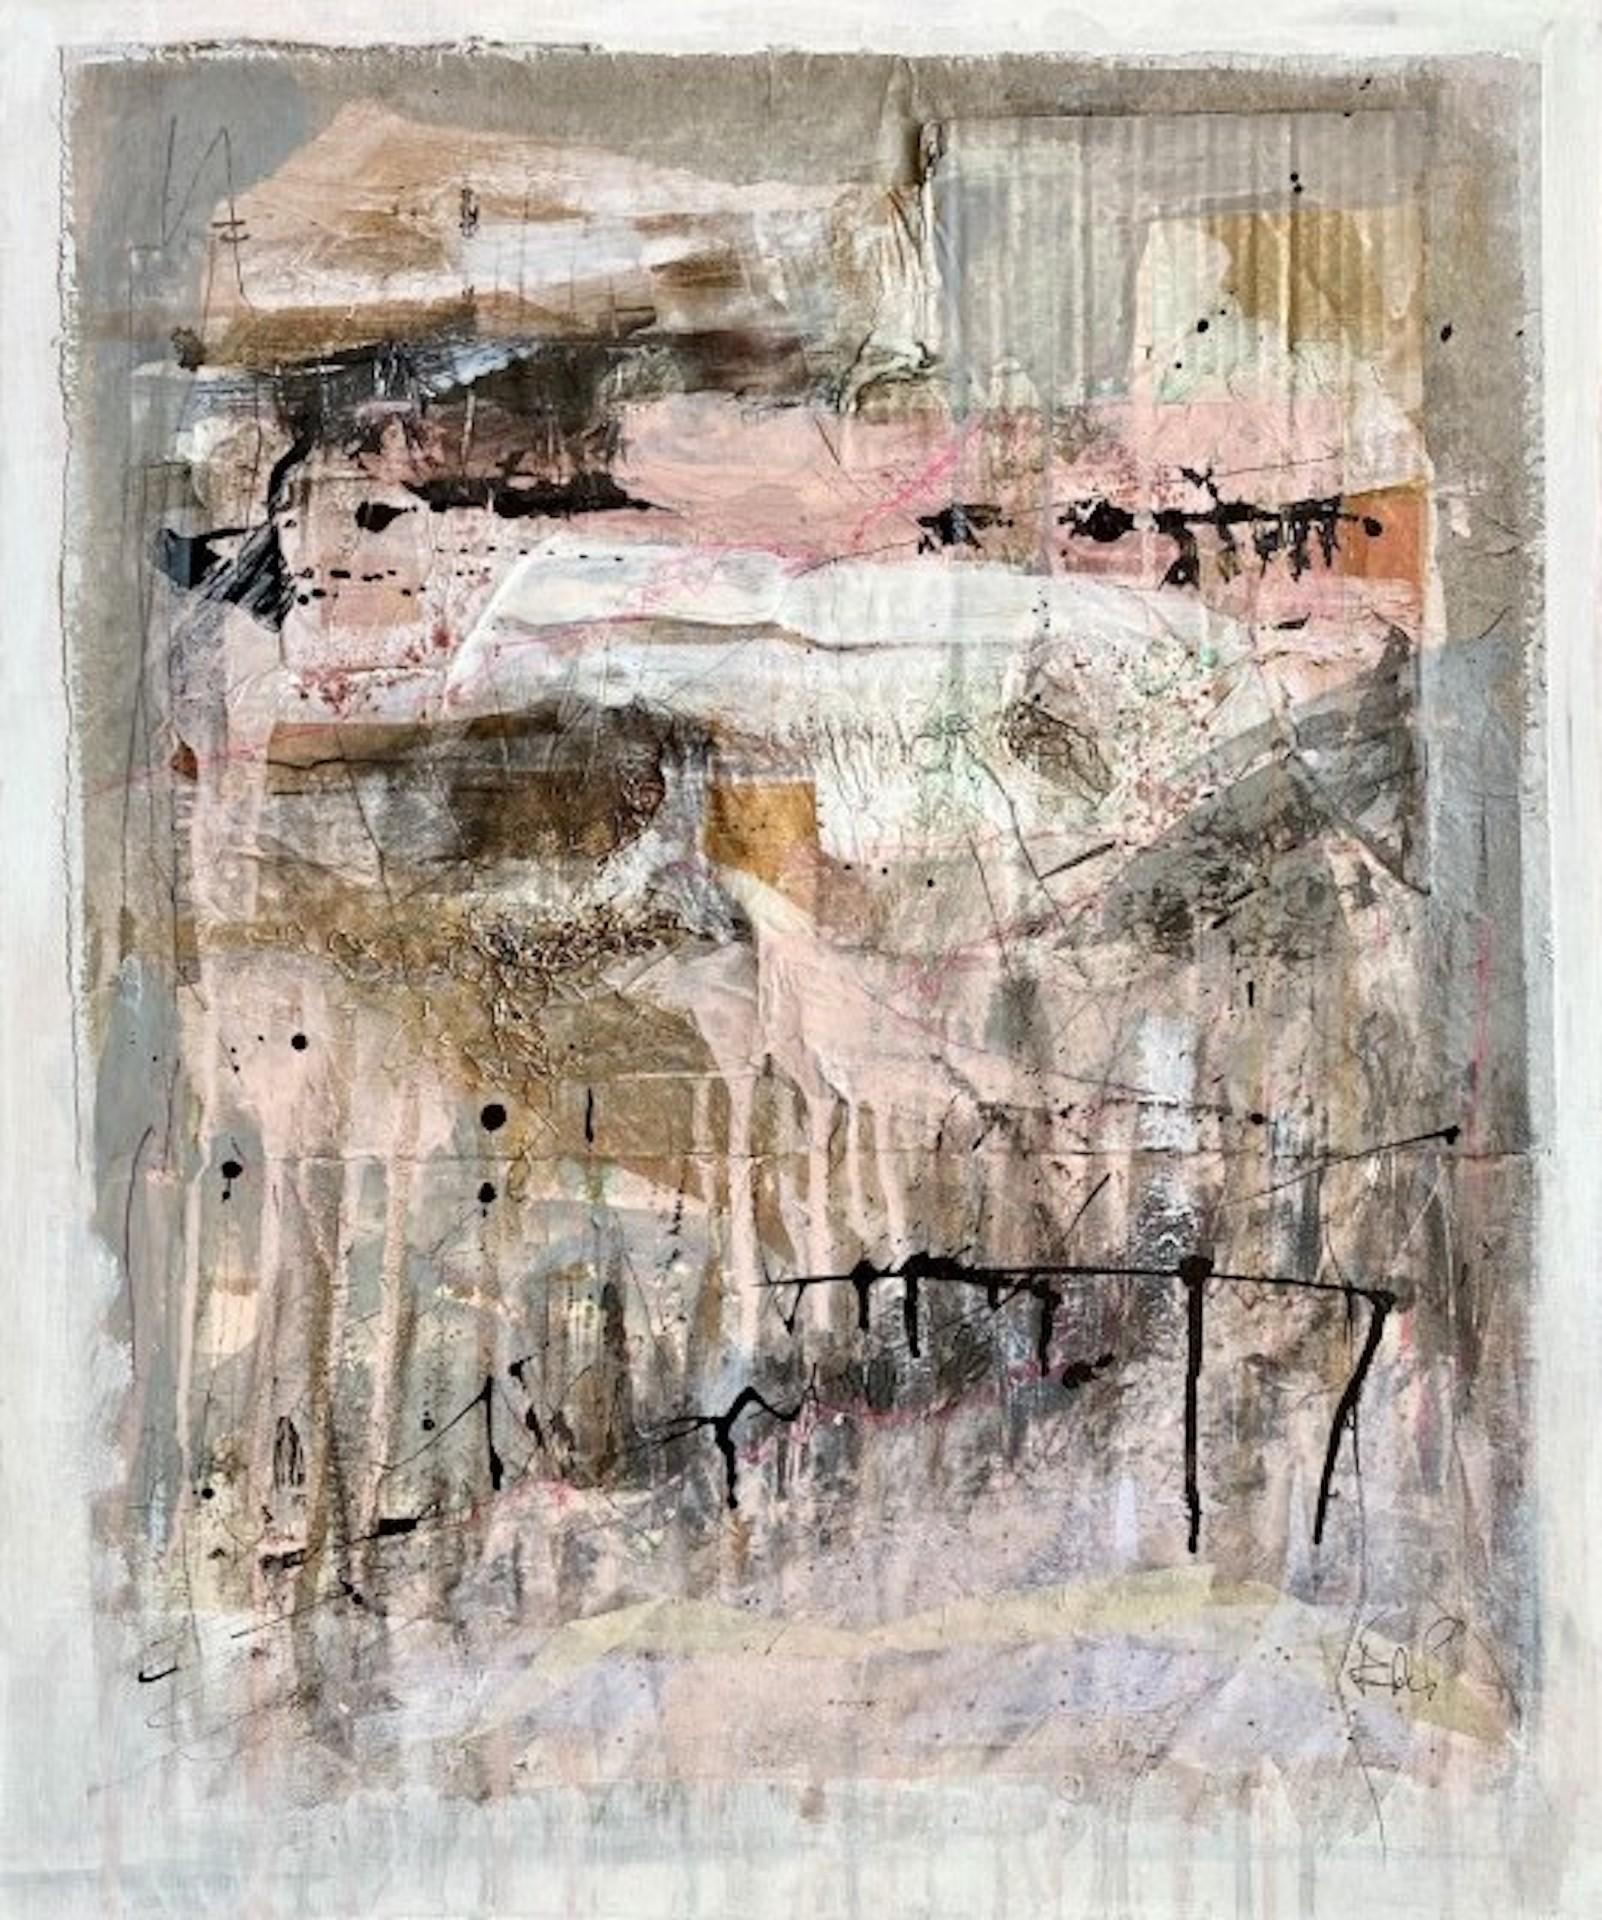 A Sense of Sea iii [2021]
Original
Abstract
Mixed media including collage, Chinese ink and gilding wax on artists board
Image size: H:61 cm x W:51 cm
Framed Size: H:64 cm x W:54 cm x D:3.5cm
Sold Framed
Please note that insitu images are purely an